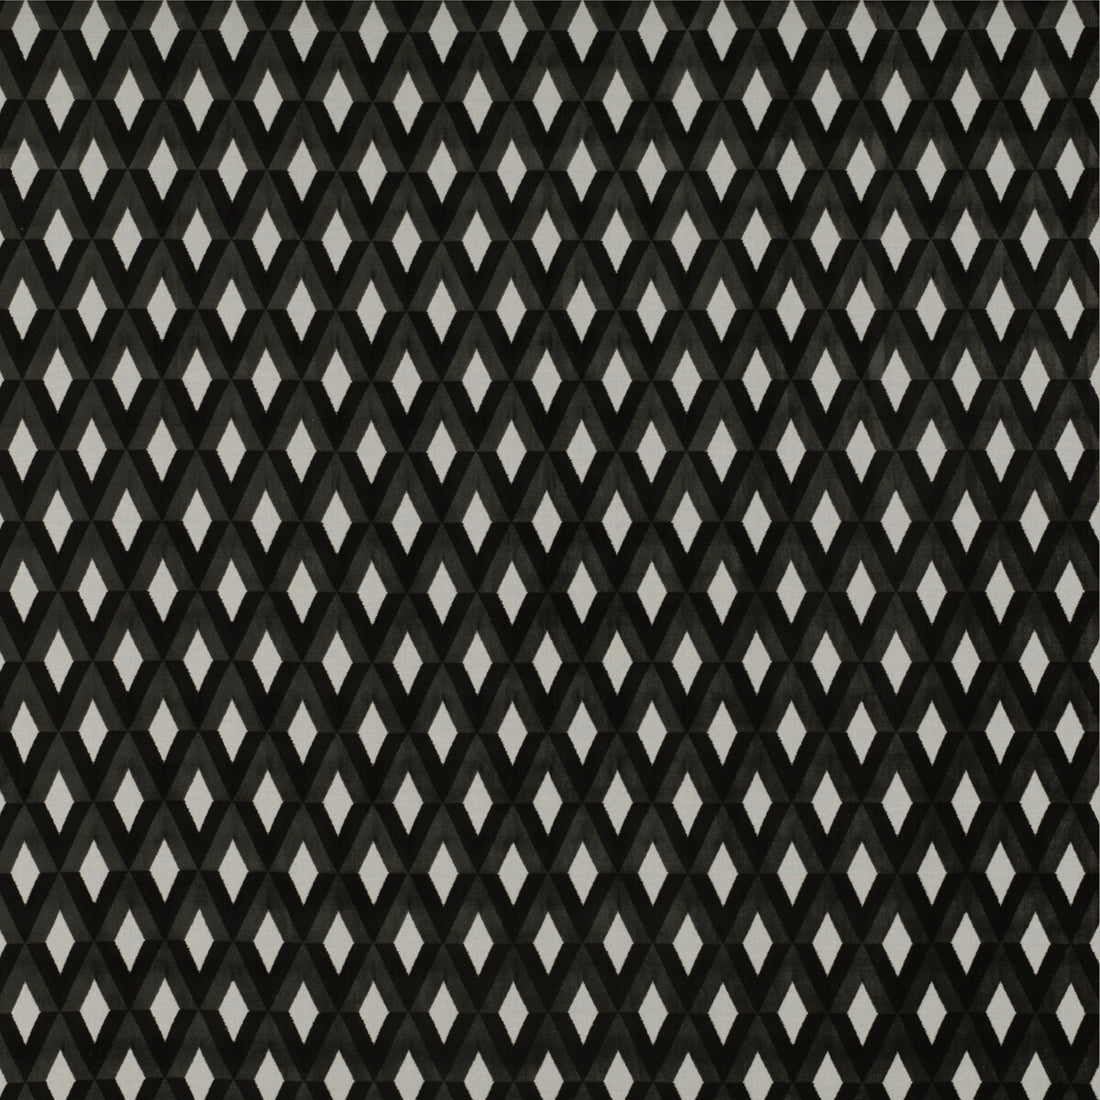 San Piero fabric in blanco/onyx color - pattern GDT5342.001.0 - by Gaston y Daniela in the Tierras collection